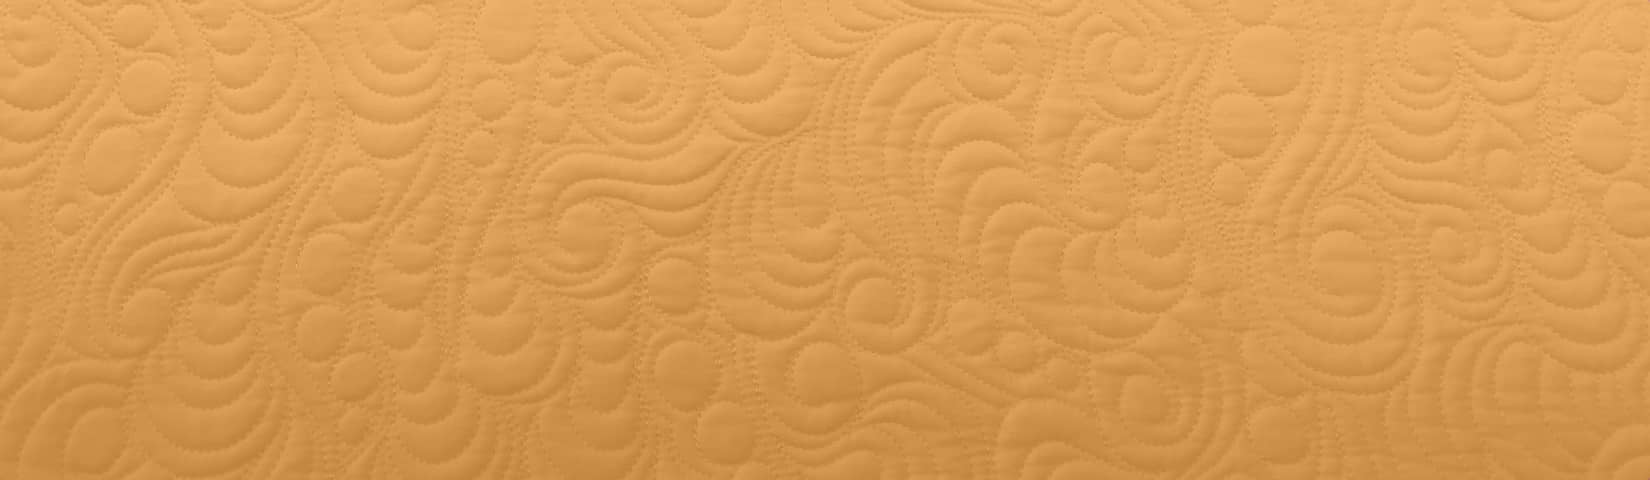 Texture of quilting on an orange background